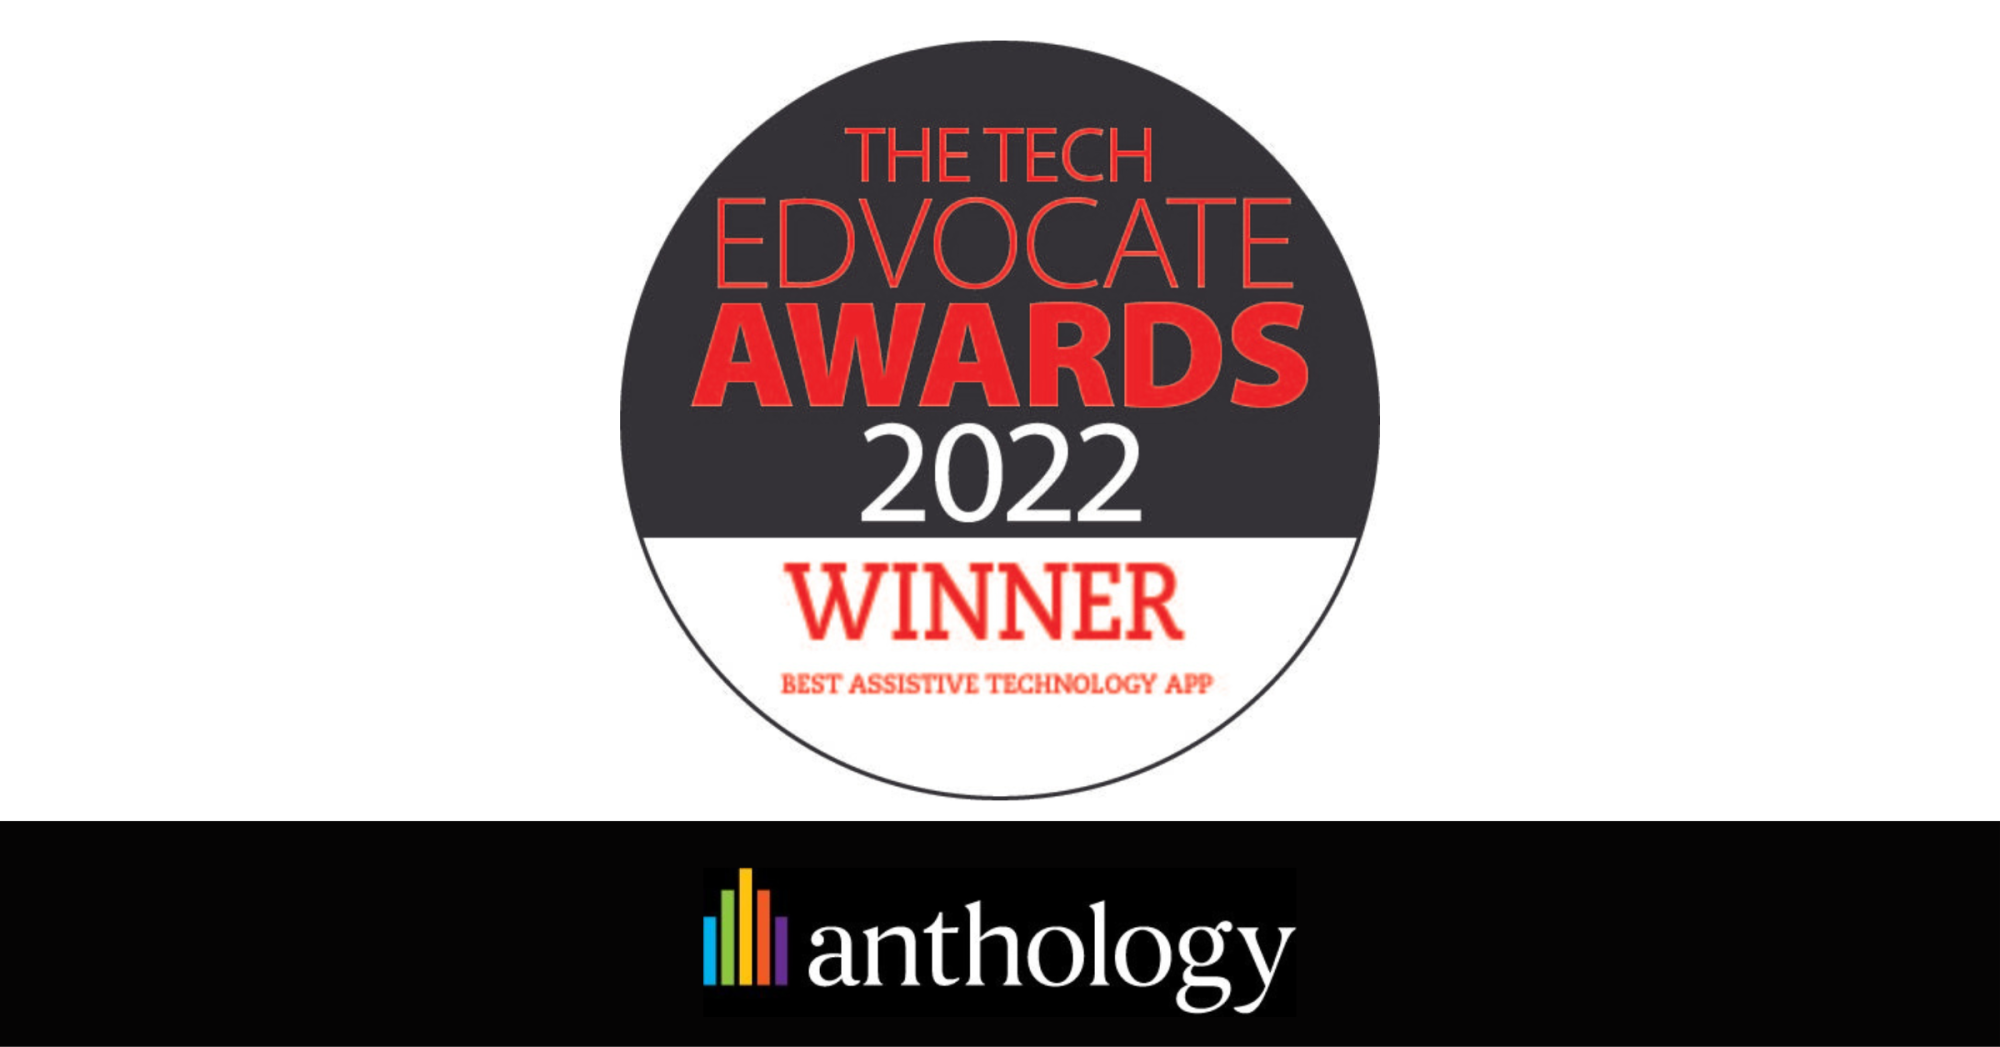 The TECH EDVOCATE AWARDS logo looked up with the Anthology logo